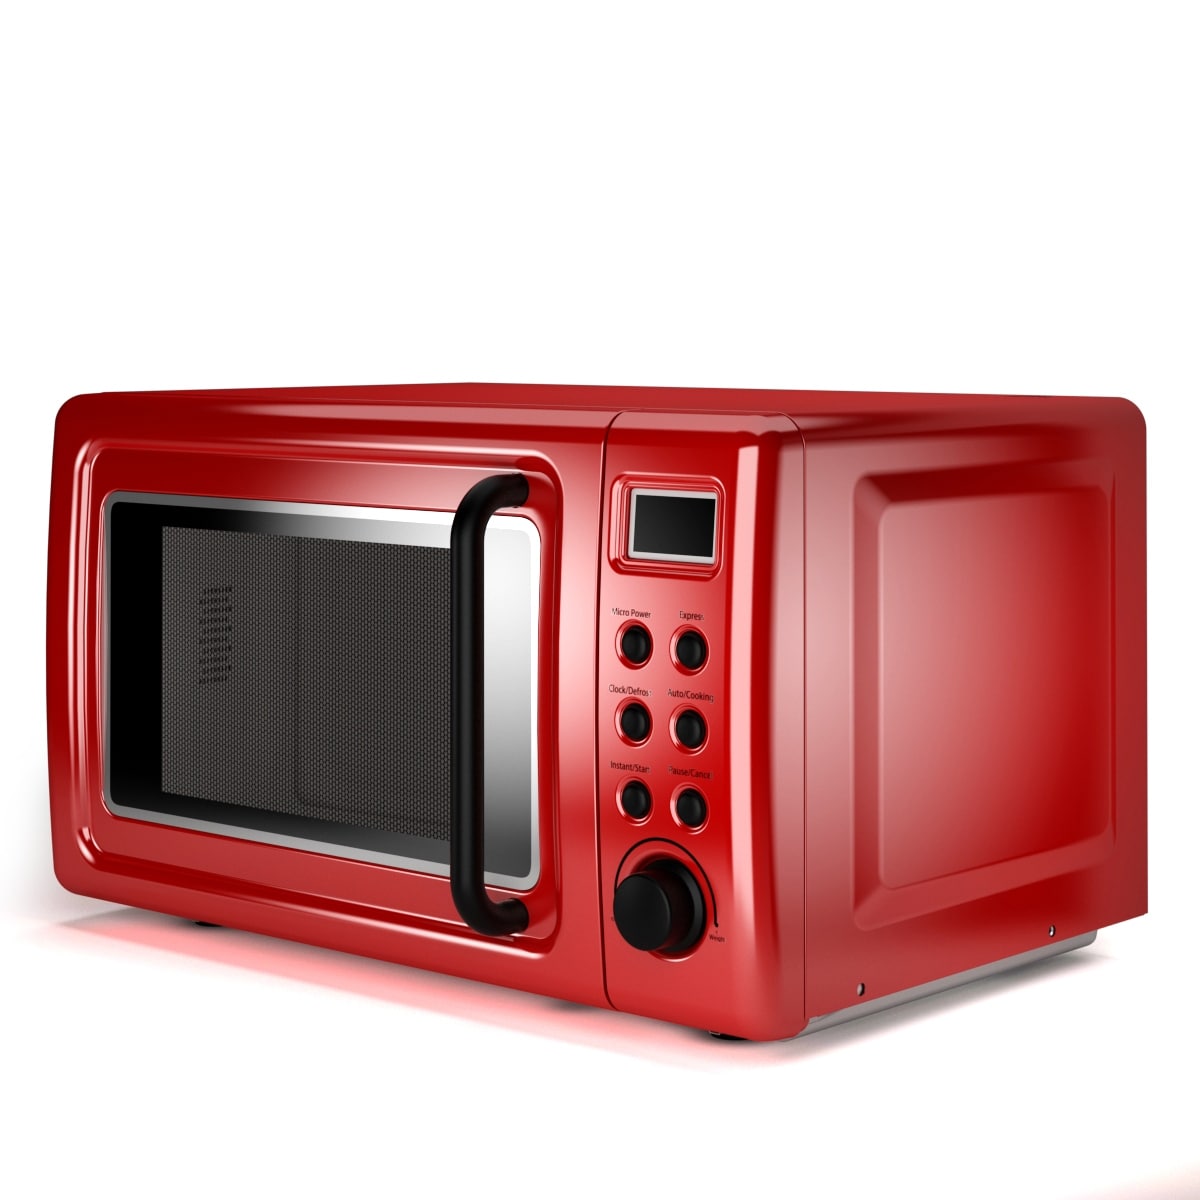 https://ak1.ostkcdn.com/images/products/is/images/direct/d5bbf6b0bd7520d5a8747ed4fa4db62eca35c5a2/Costway-0.7Cu.ft-Retro-Countertop-Microwave-Oven-700W-LED-Display-Glass-Turntable-RedGreenblack-rose-gold.jpg